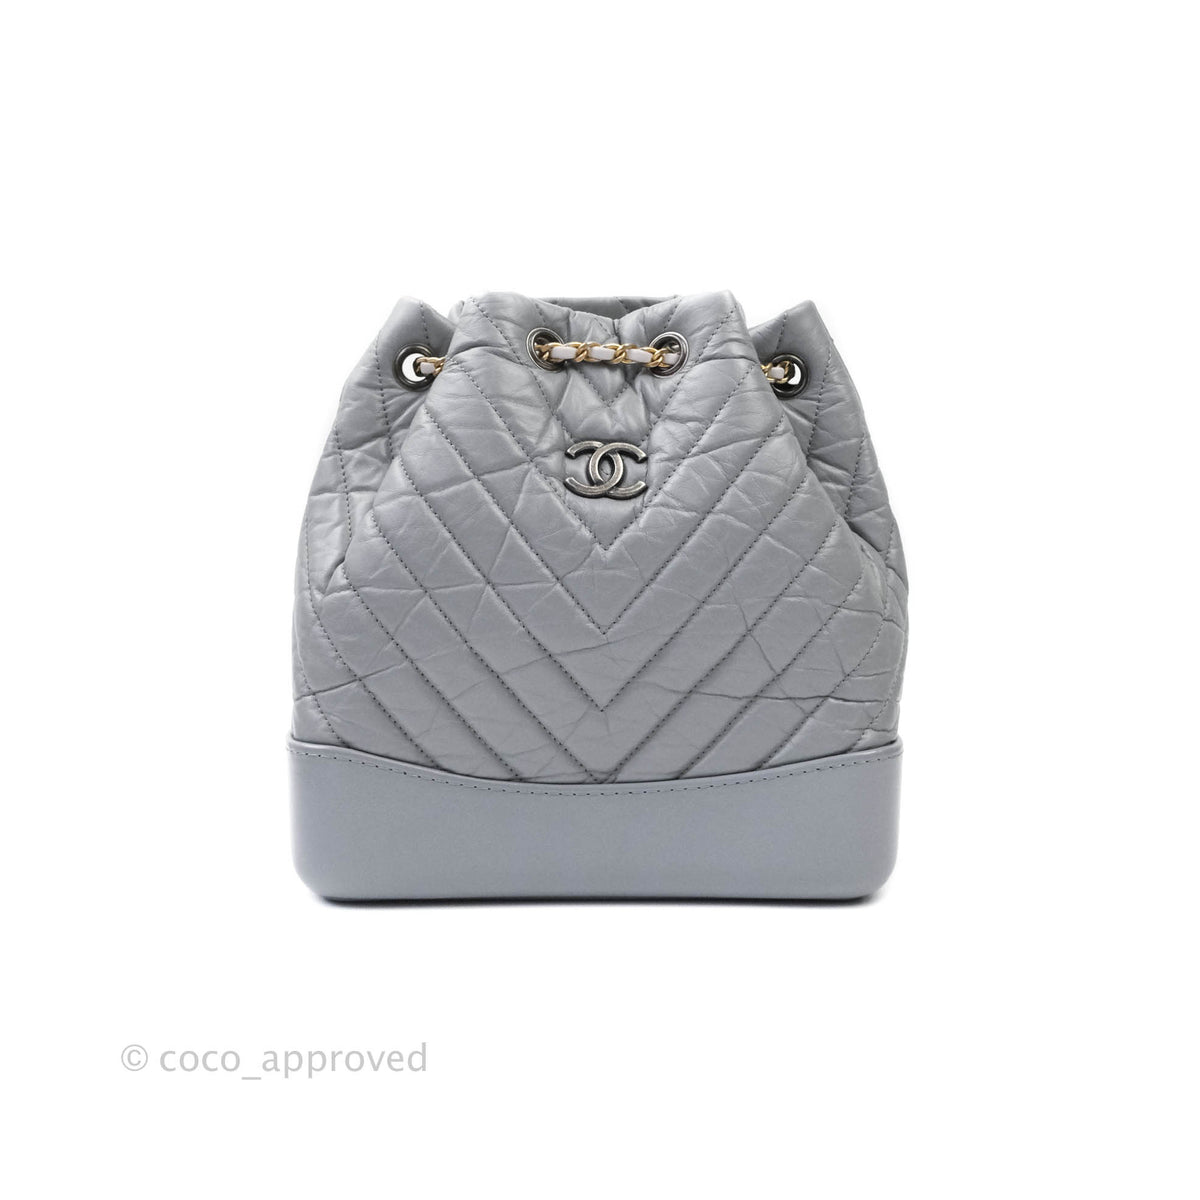 Chanel Gabrielle Backpack Blue Aged Calfskin Small – Coco Approved